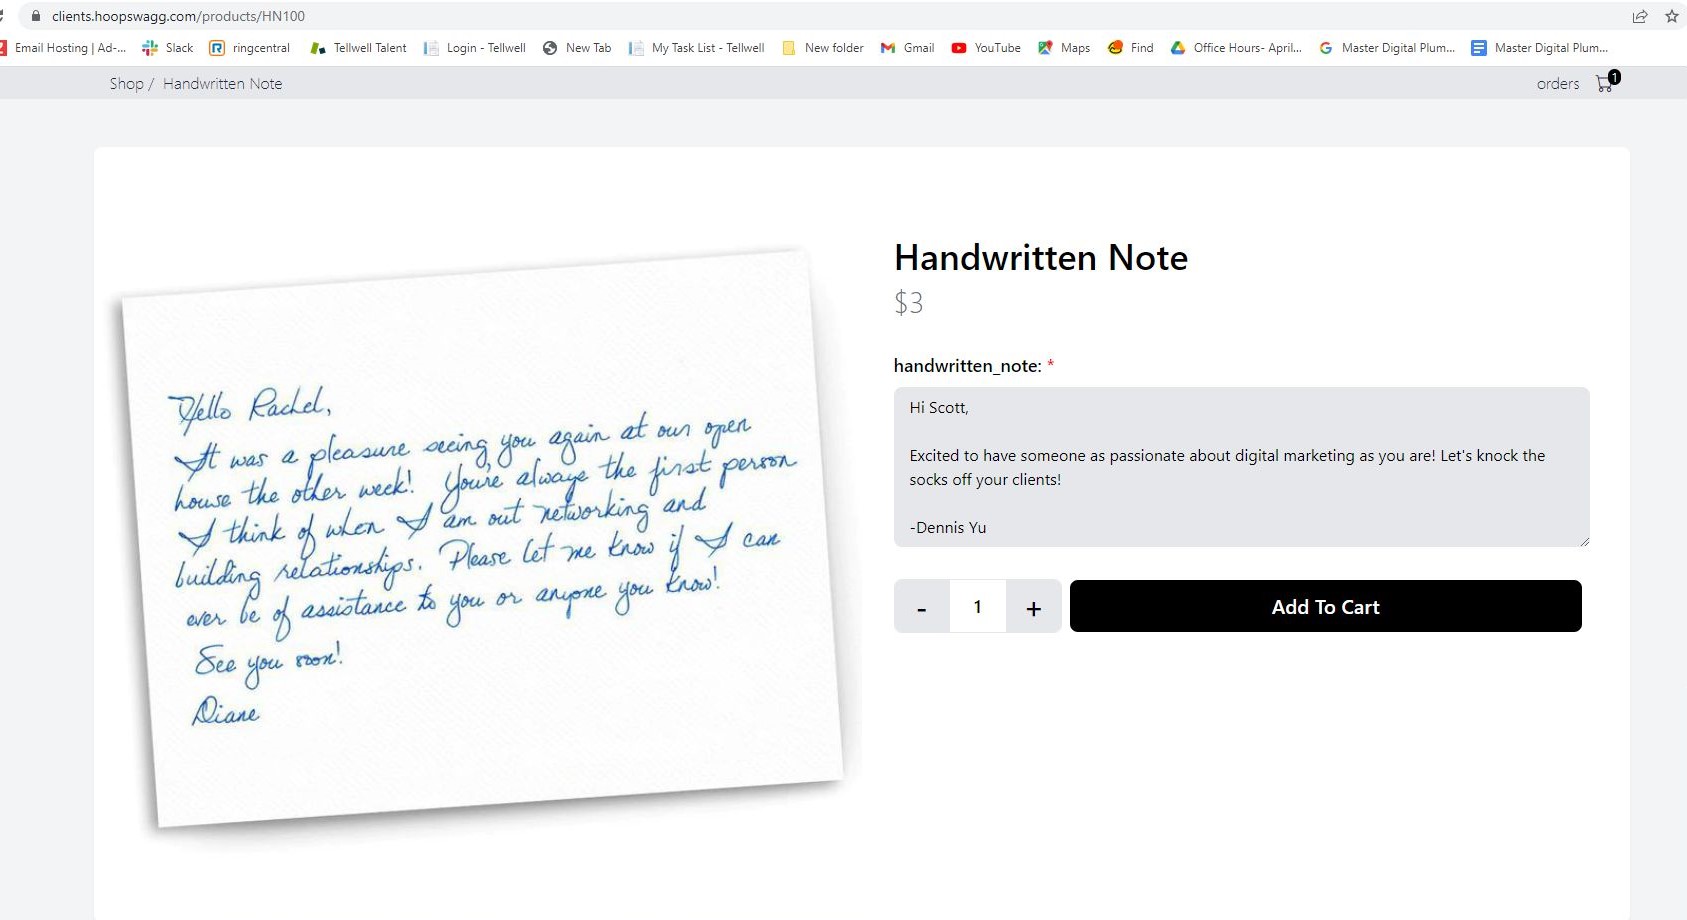 Click on the “Handwritten Note”